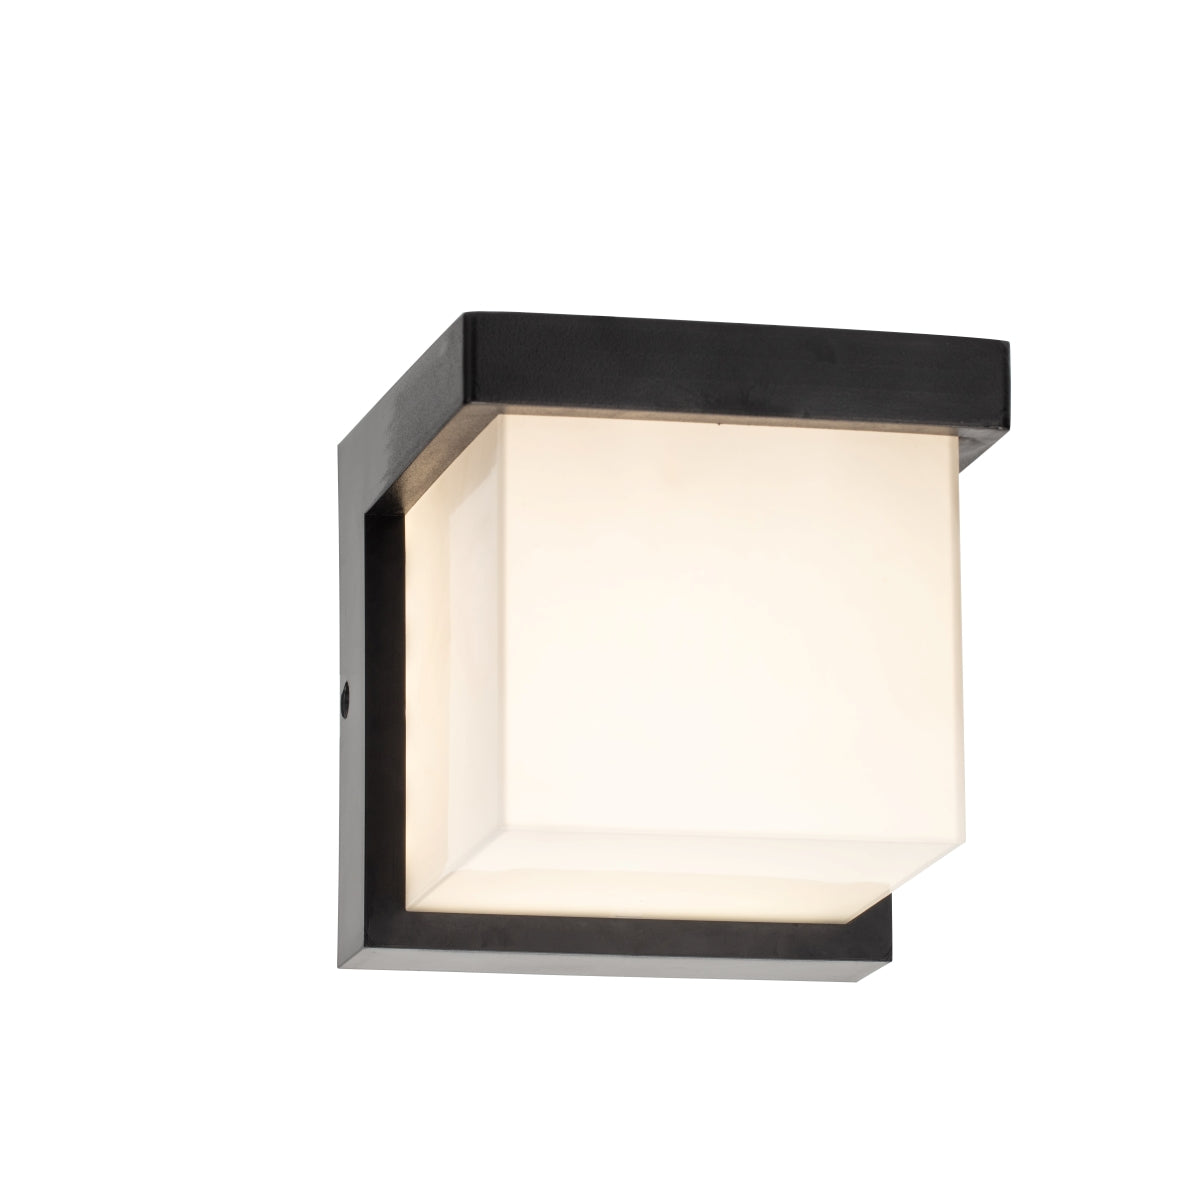 Our Addison black plastic ABS plastic outdoor wall mounted rectangle outdoor light with built in LED's would look perfect in a modern or more traditional home design. Outside wall lights can provide atmospheric light in your garden, at the front door or on the terrace as well as a great security solution. It is designed for durability and longevity with its robust material producing a fully weatherproof and water resistant light fitting.